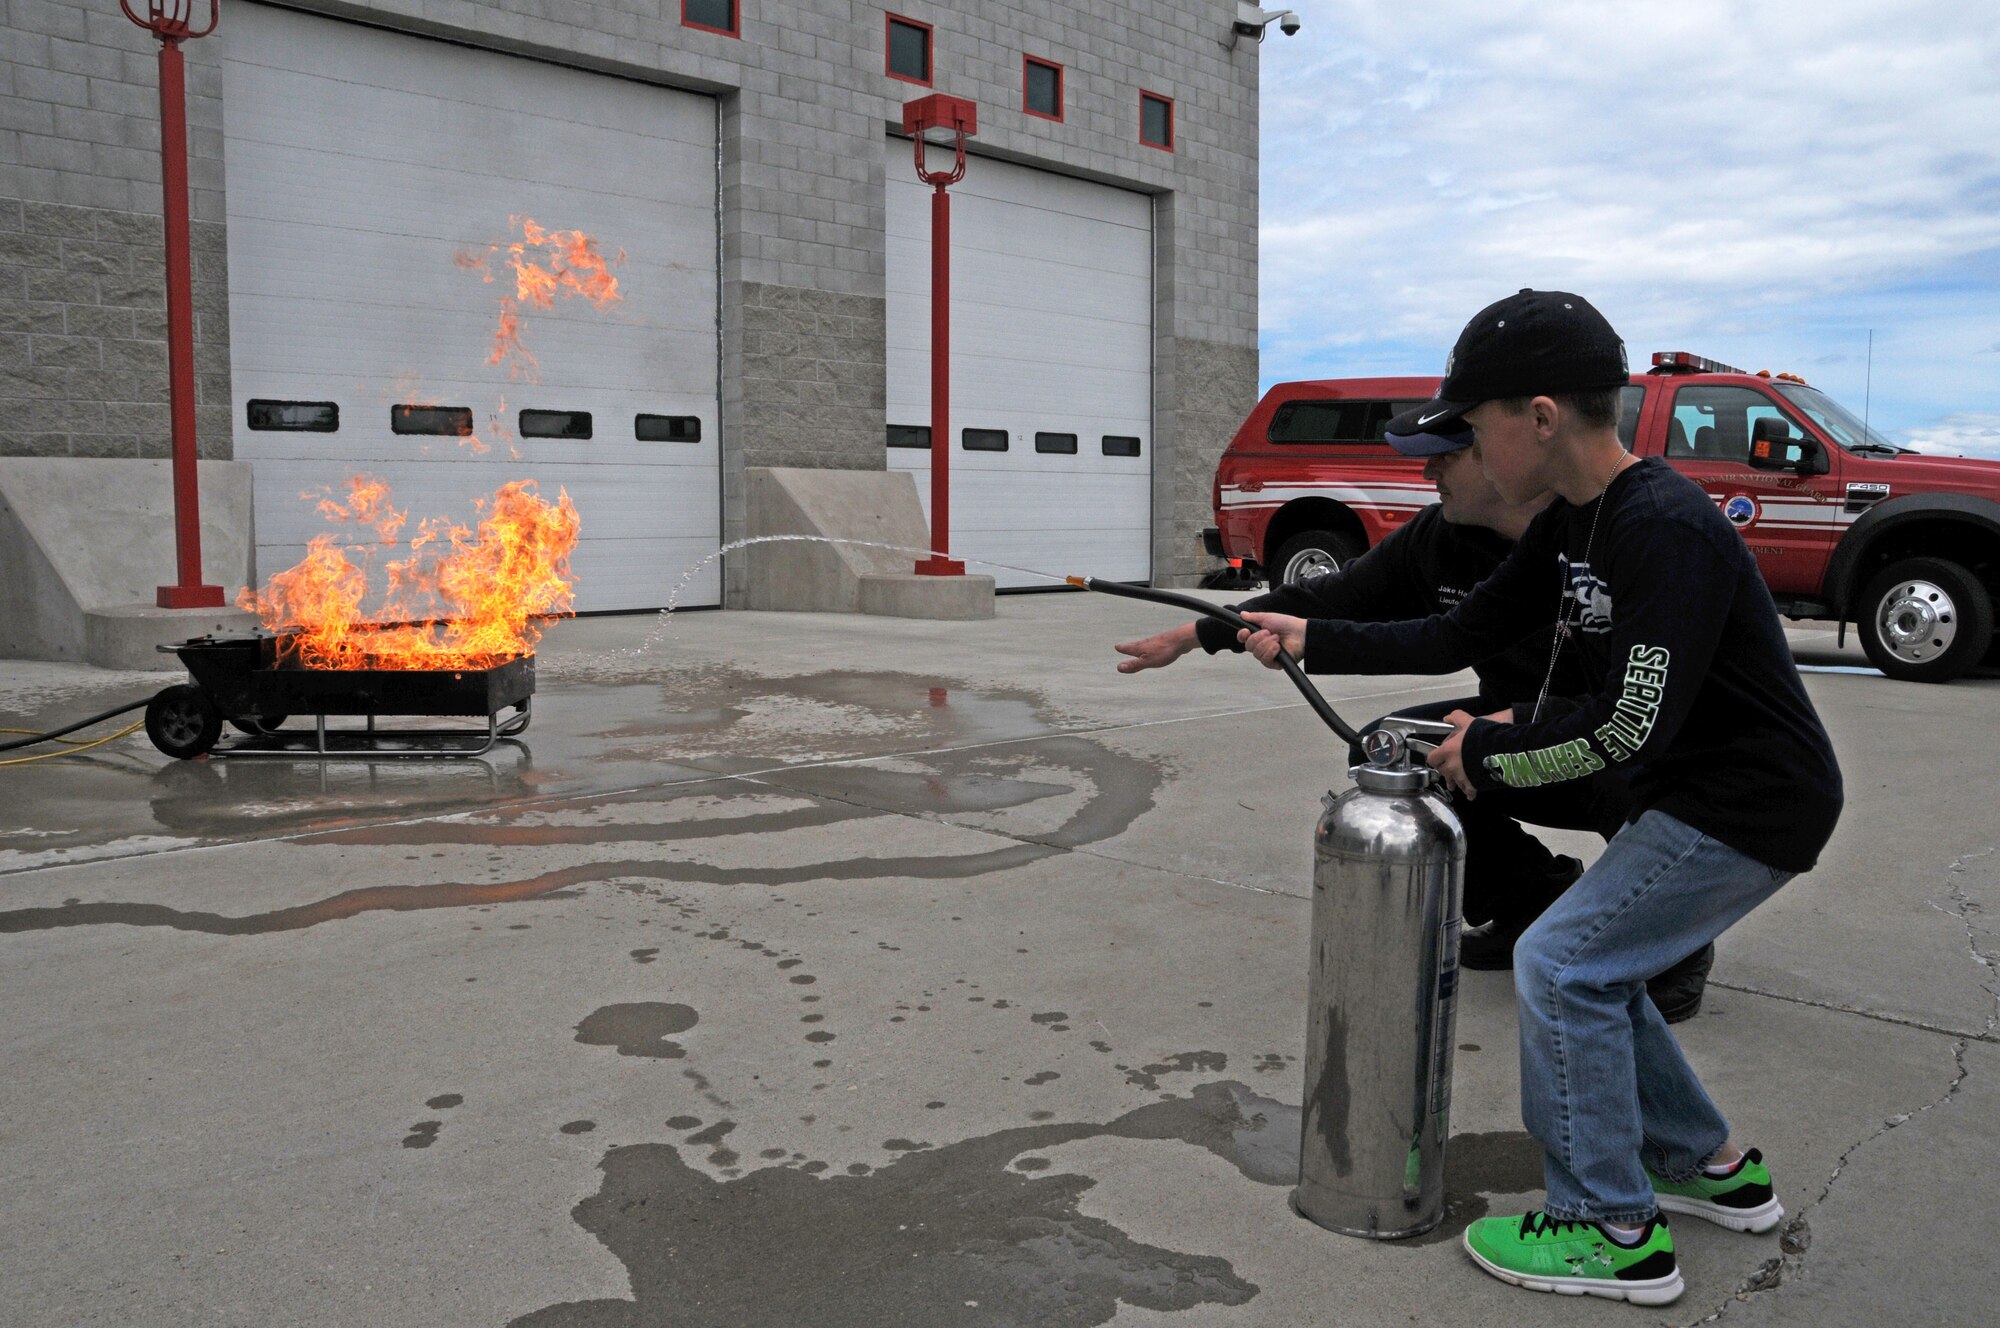 Montana Air National Guard Fire Department Lt. Jacob Harris shows a child how to operate a fire extinguisher on a fire during a STARBASE tour of the station June 15, 2016. (U.S. Air National Guard photo/Senior Master Sgt. Eric Peterson)